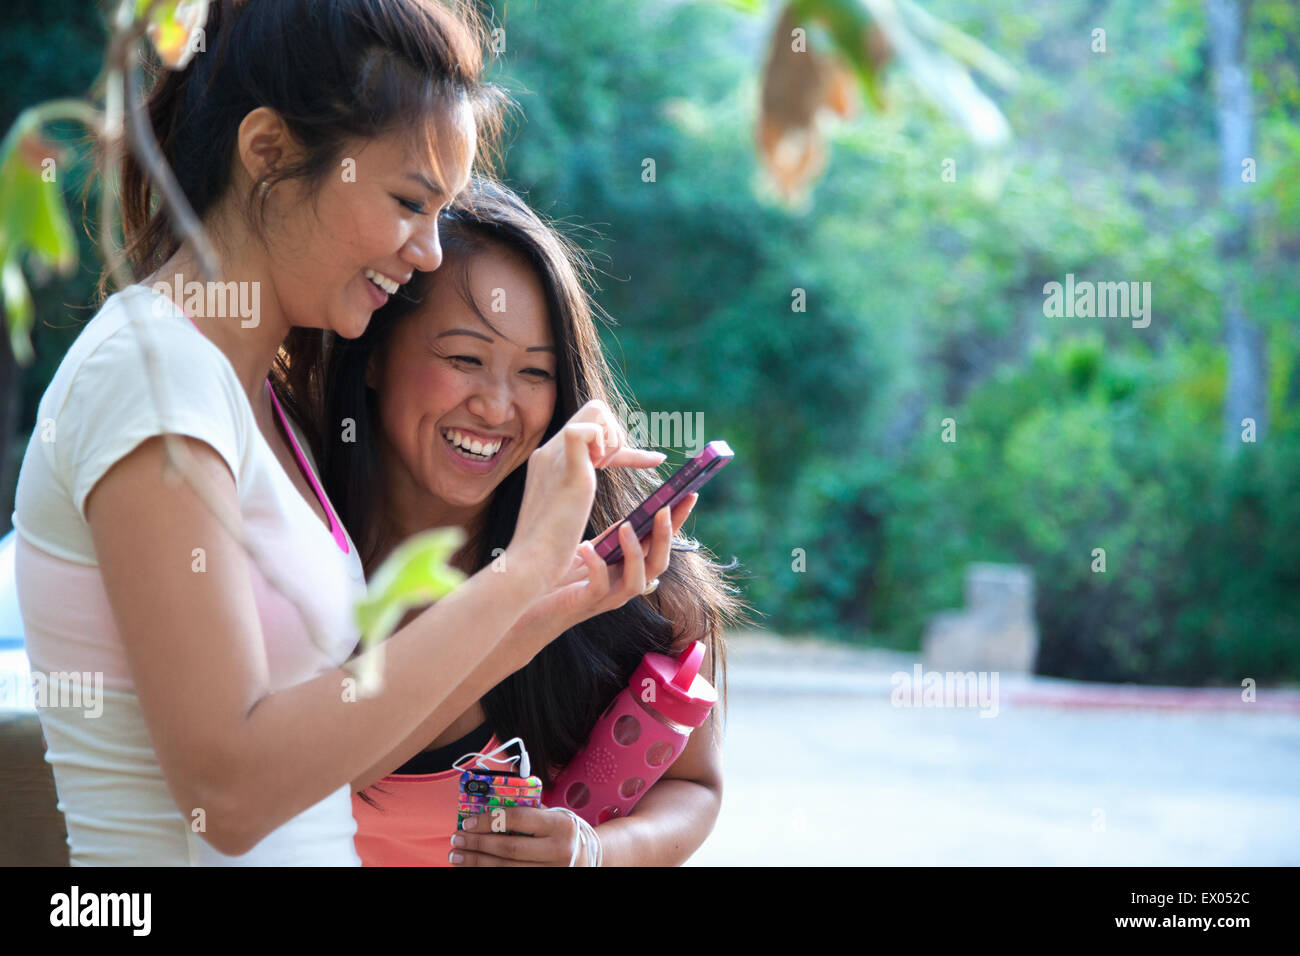 Two mid adult women looking at smartphone together, outdoors Stock Photo